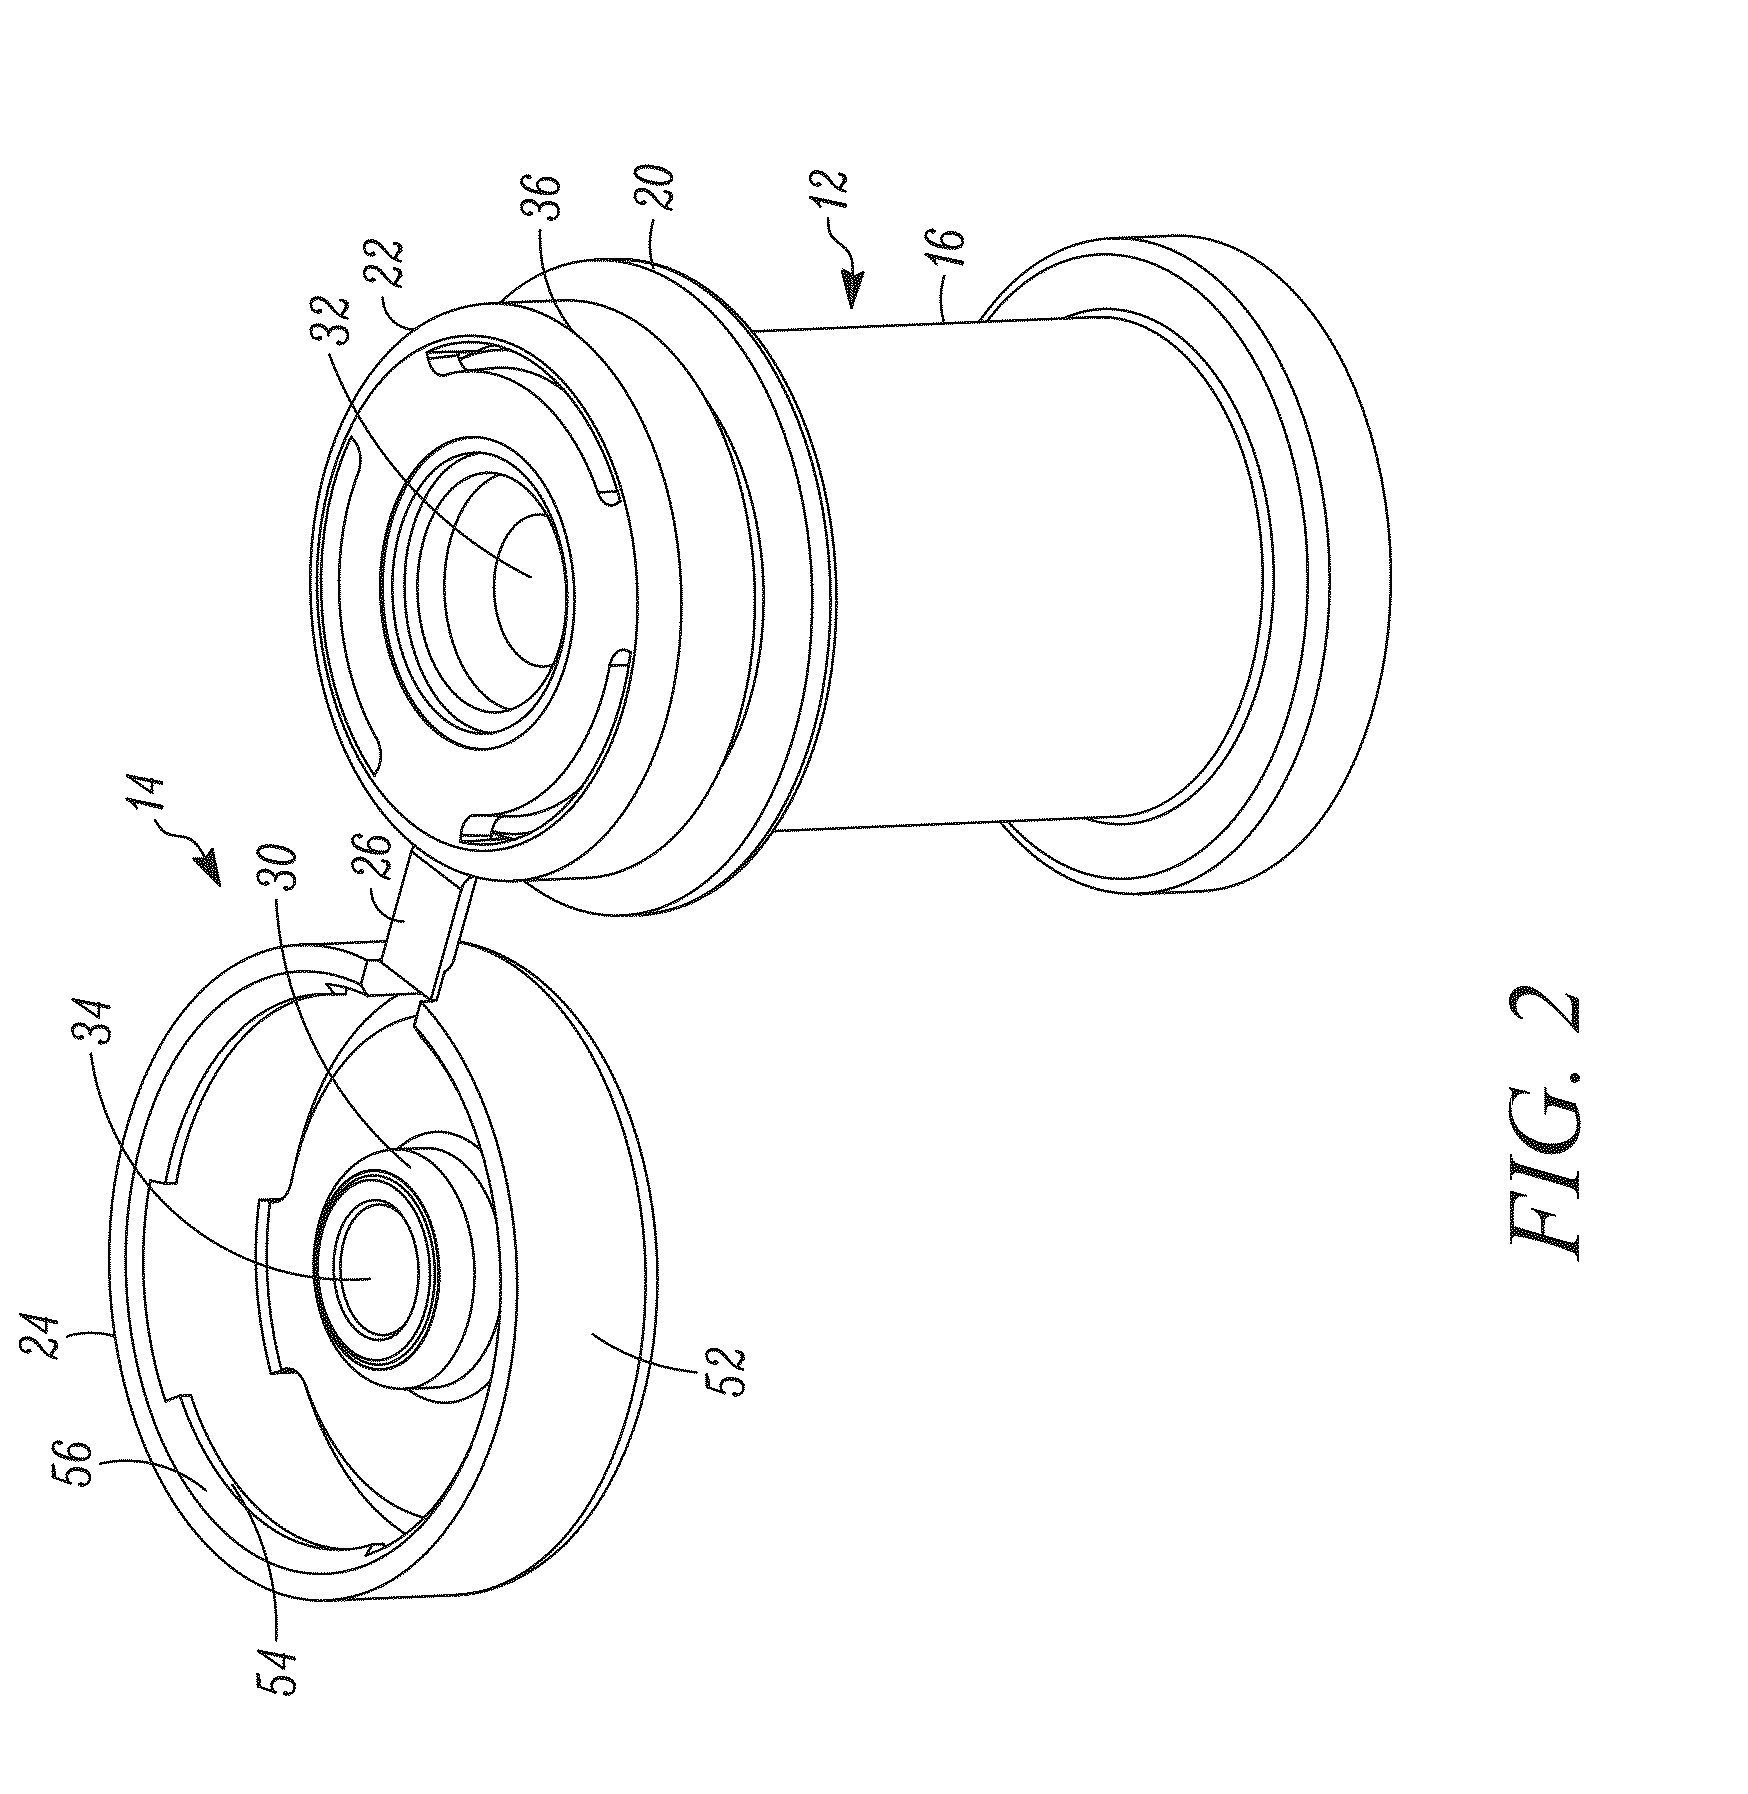 Controlled non-classified filling device and method